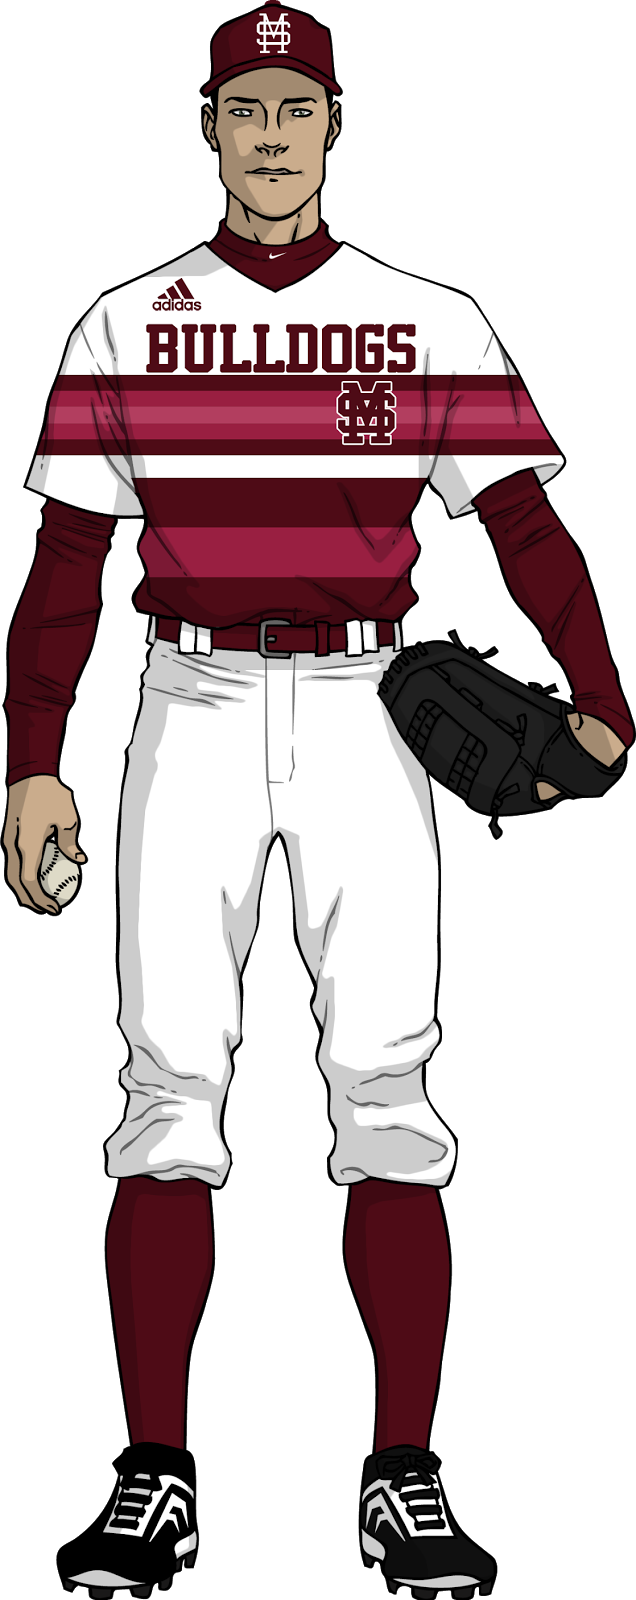 The Bulldogs Currently Have Four Hats - Mississippi State Baseball Uniforms (636x1600)